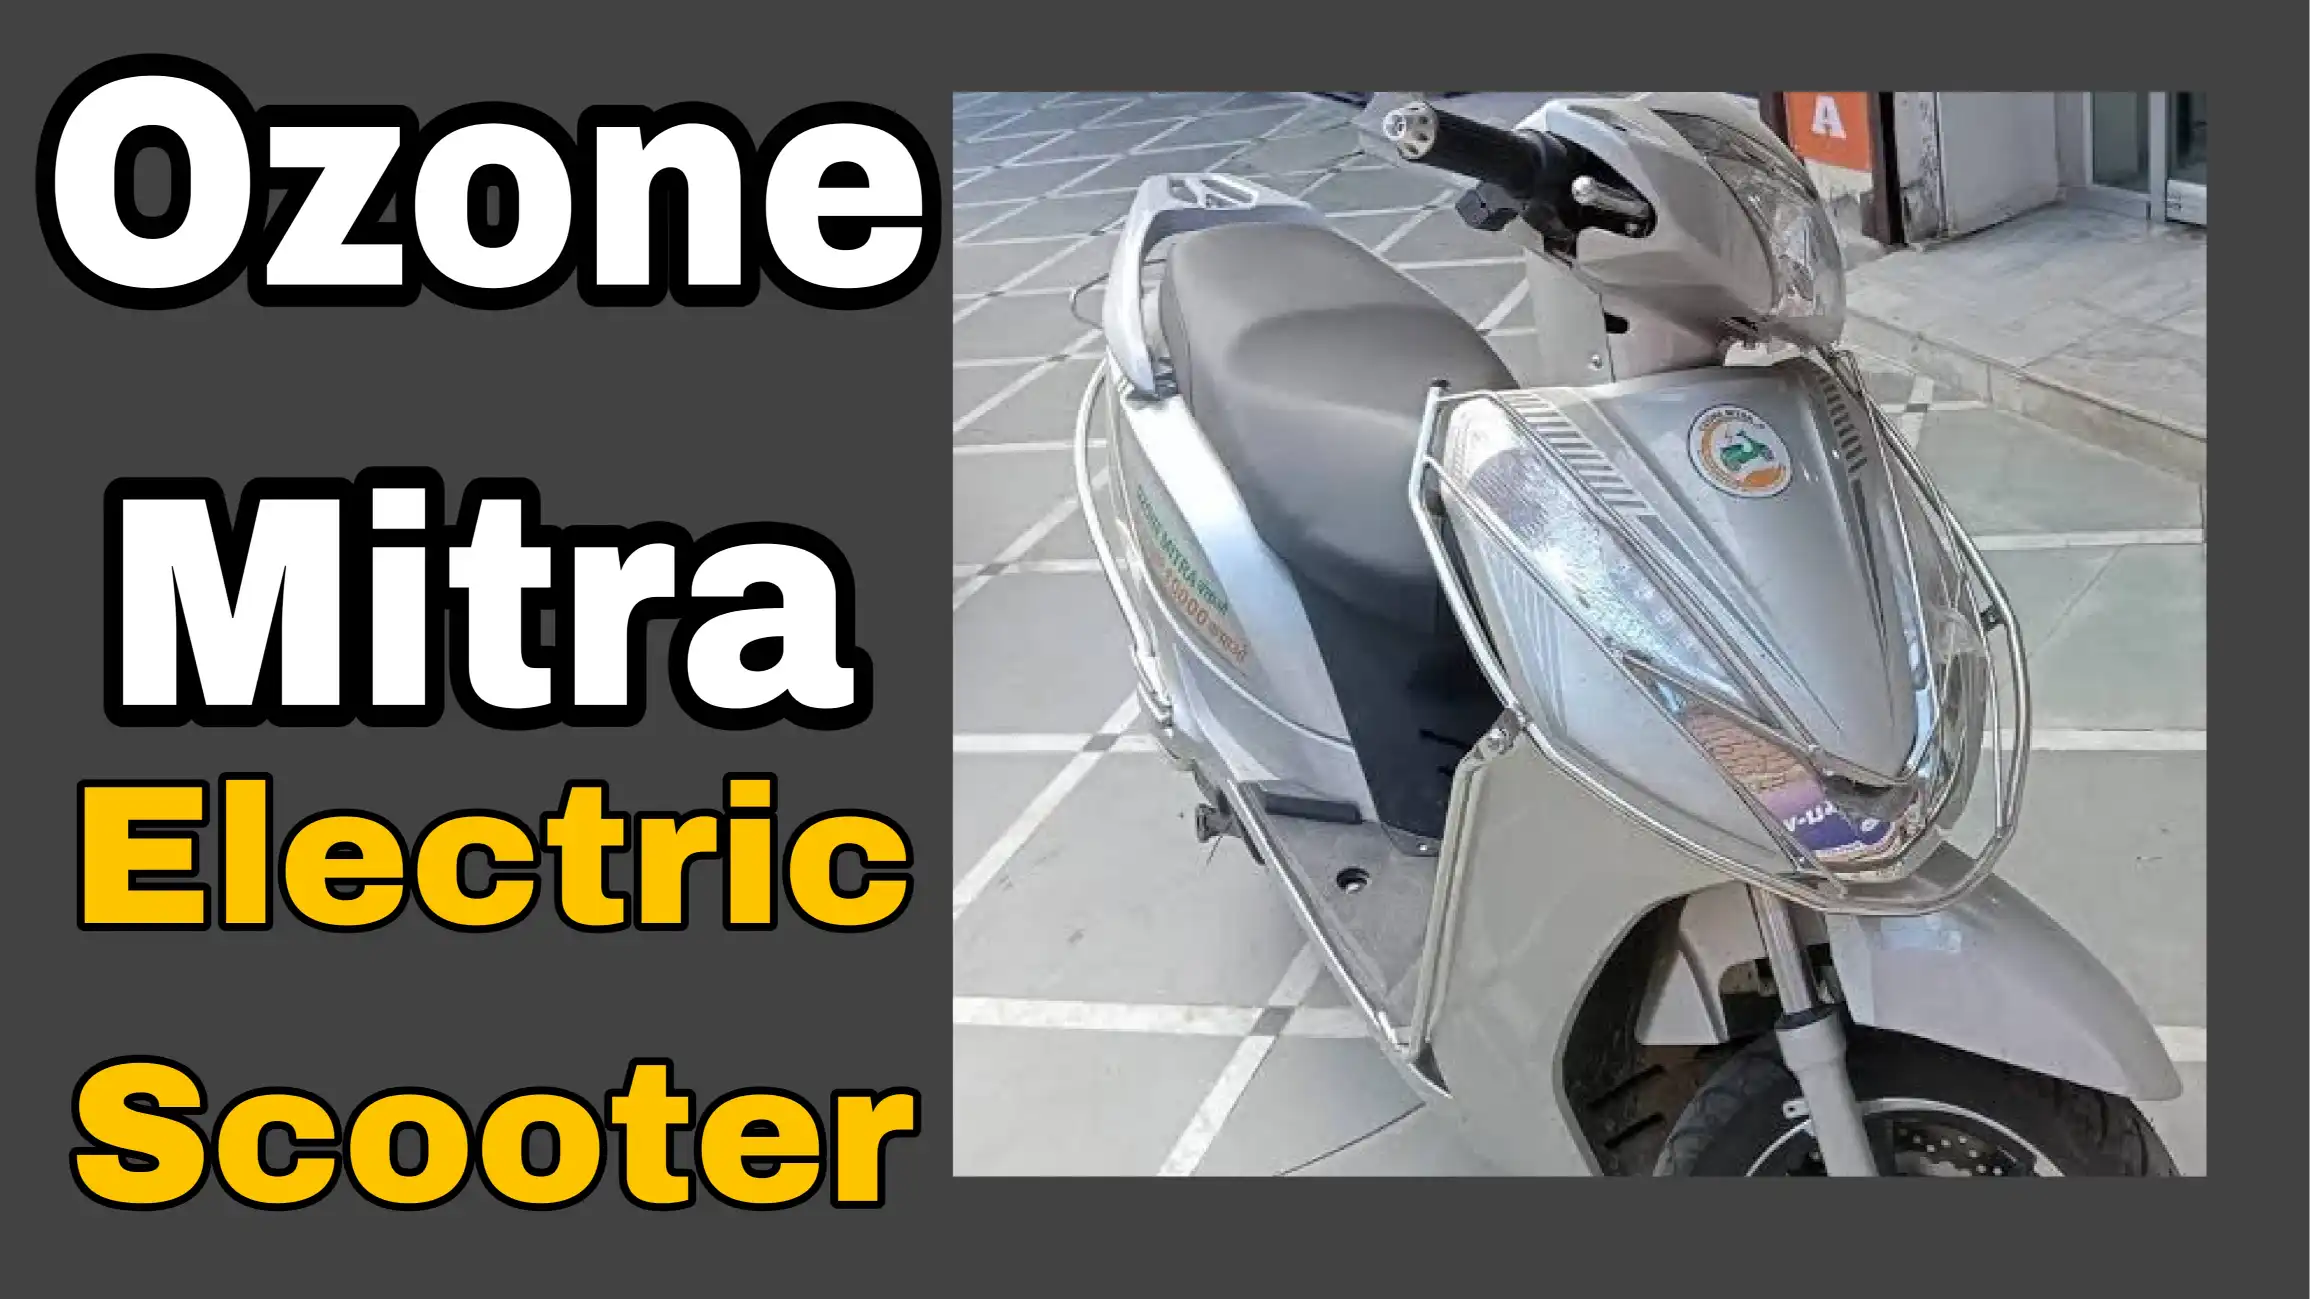 Ozone Mitra Electric Scooter